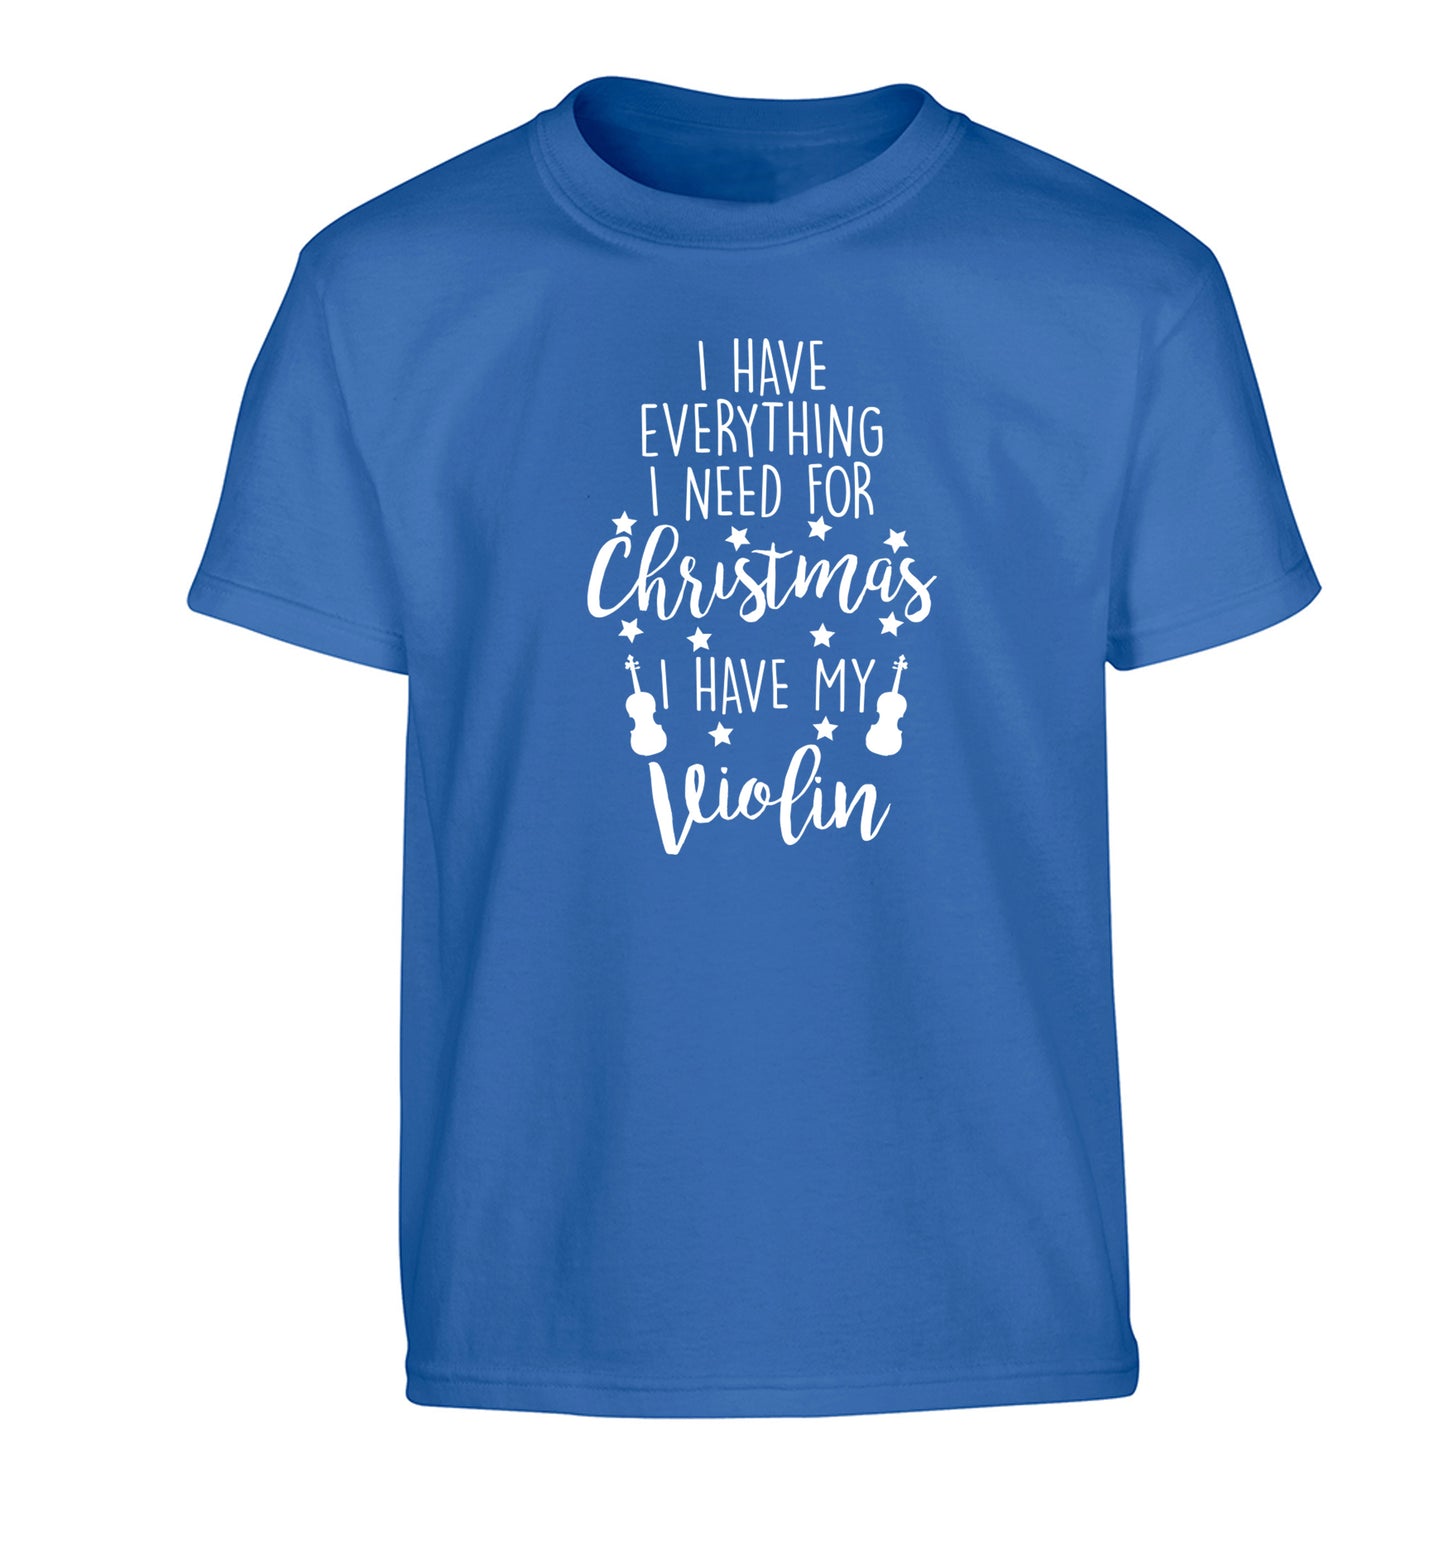 I have everything I need for Christmas I have my violin Children's blue Tshirt 12-13 Years